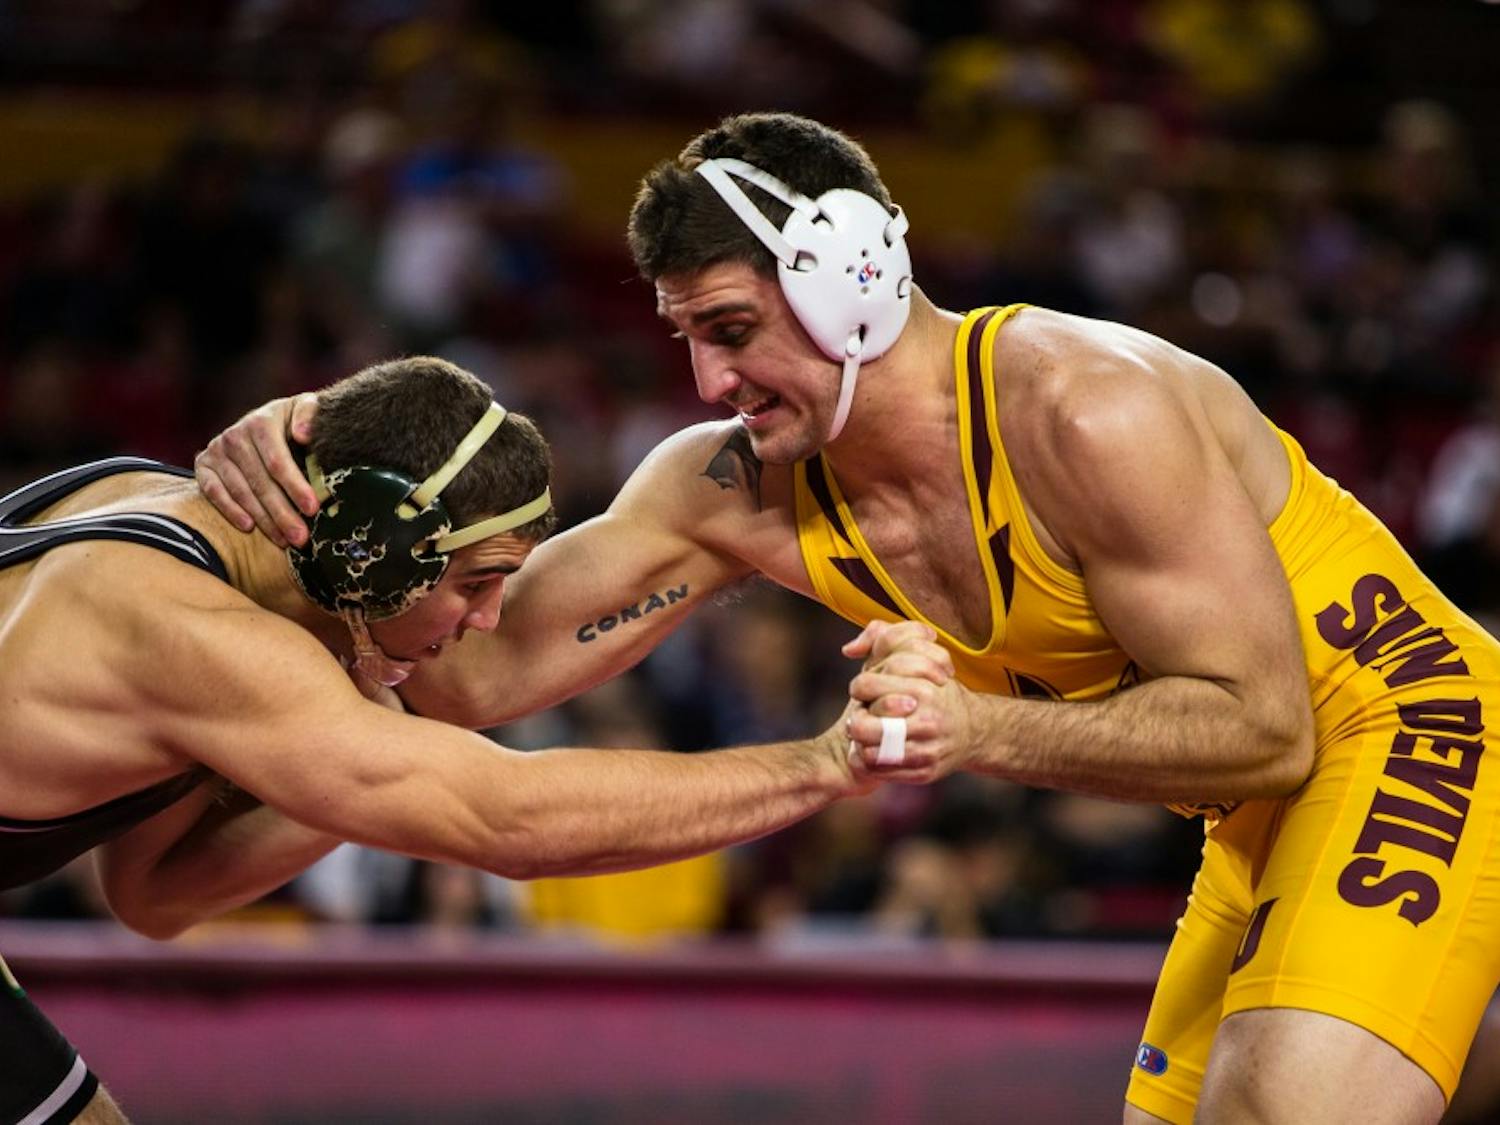 ASU redshirt junior Josh DaSilveira grapples with Cal Poly sophomore J.T. Goodwin during the 197-pound weight division match at Wells Fargo Arena on Feb. 16, 2015. DaSilveira would earn the victory and the Sun Devils would win in dominating fashion beating the Mustangs 30-9. (Daniel Kwon/The State Press)